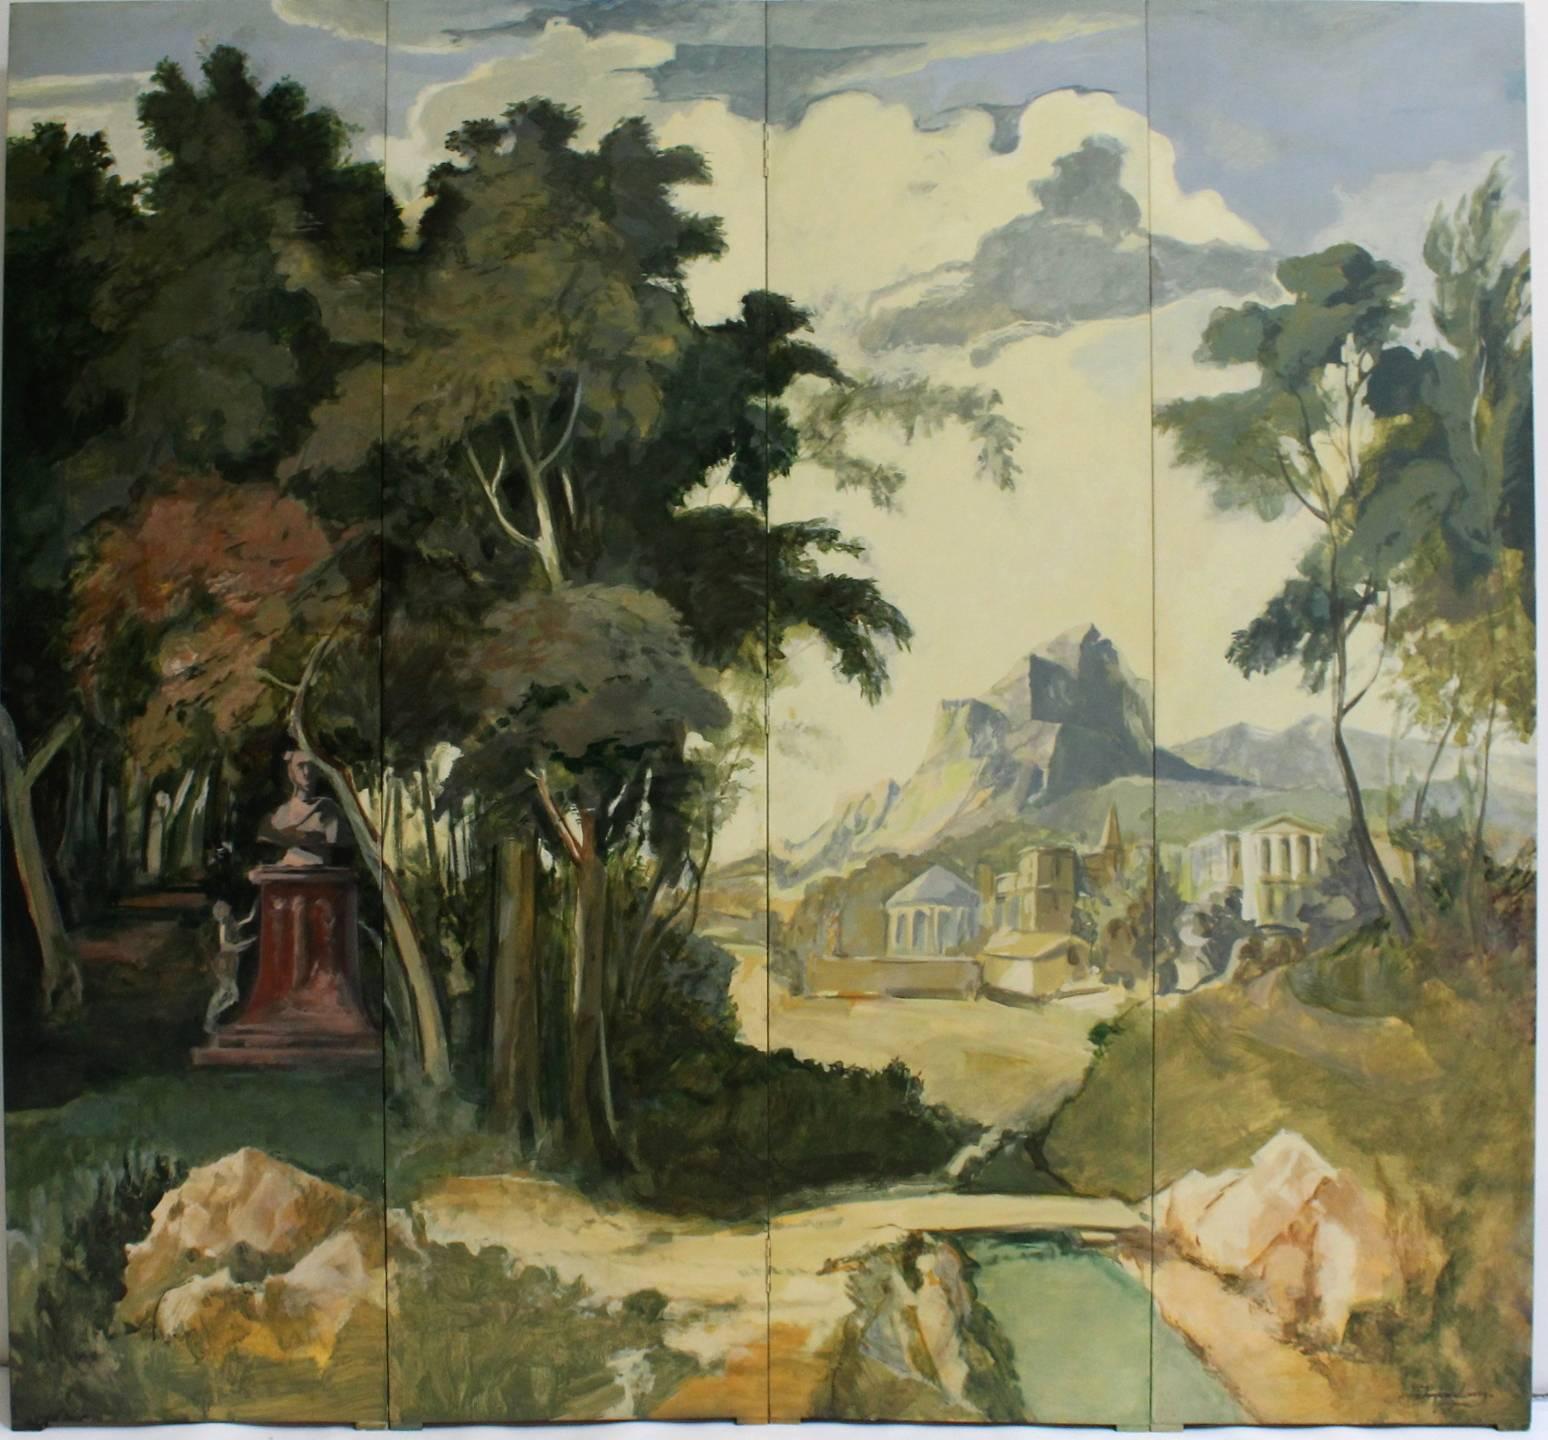 Hand-painted landscape of ruins flanked by mountains in romantic Renaissance style. Painted by artist Jacques Lamy in the 1990s.

Measures: 78.5